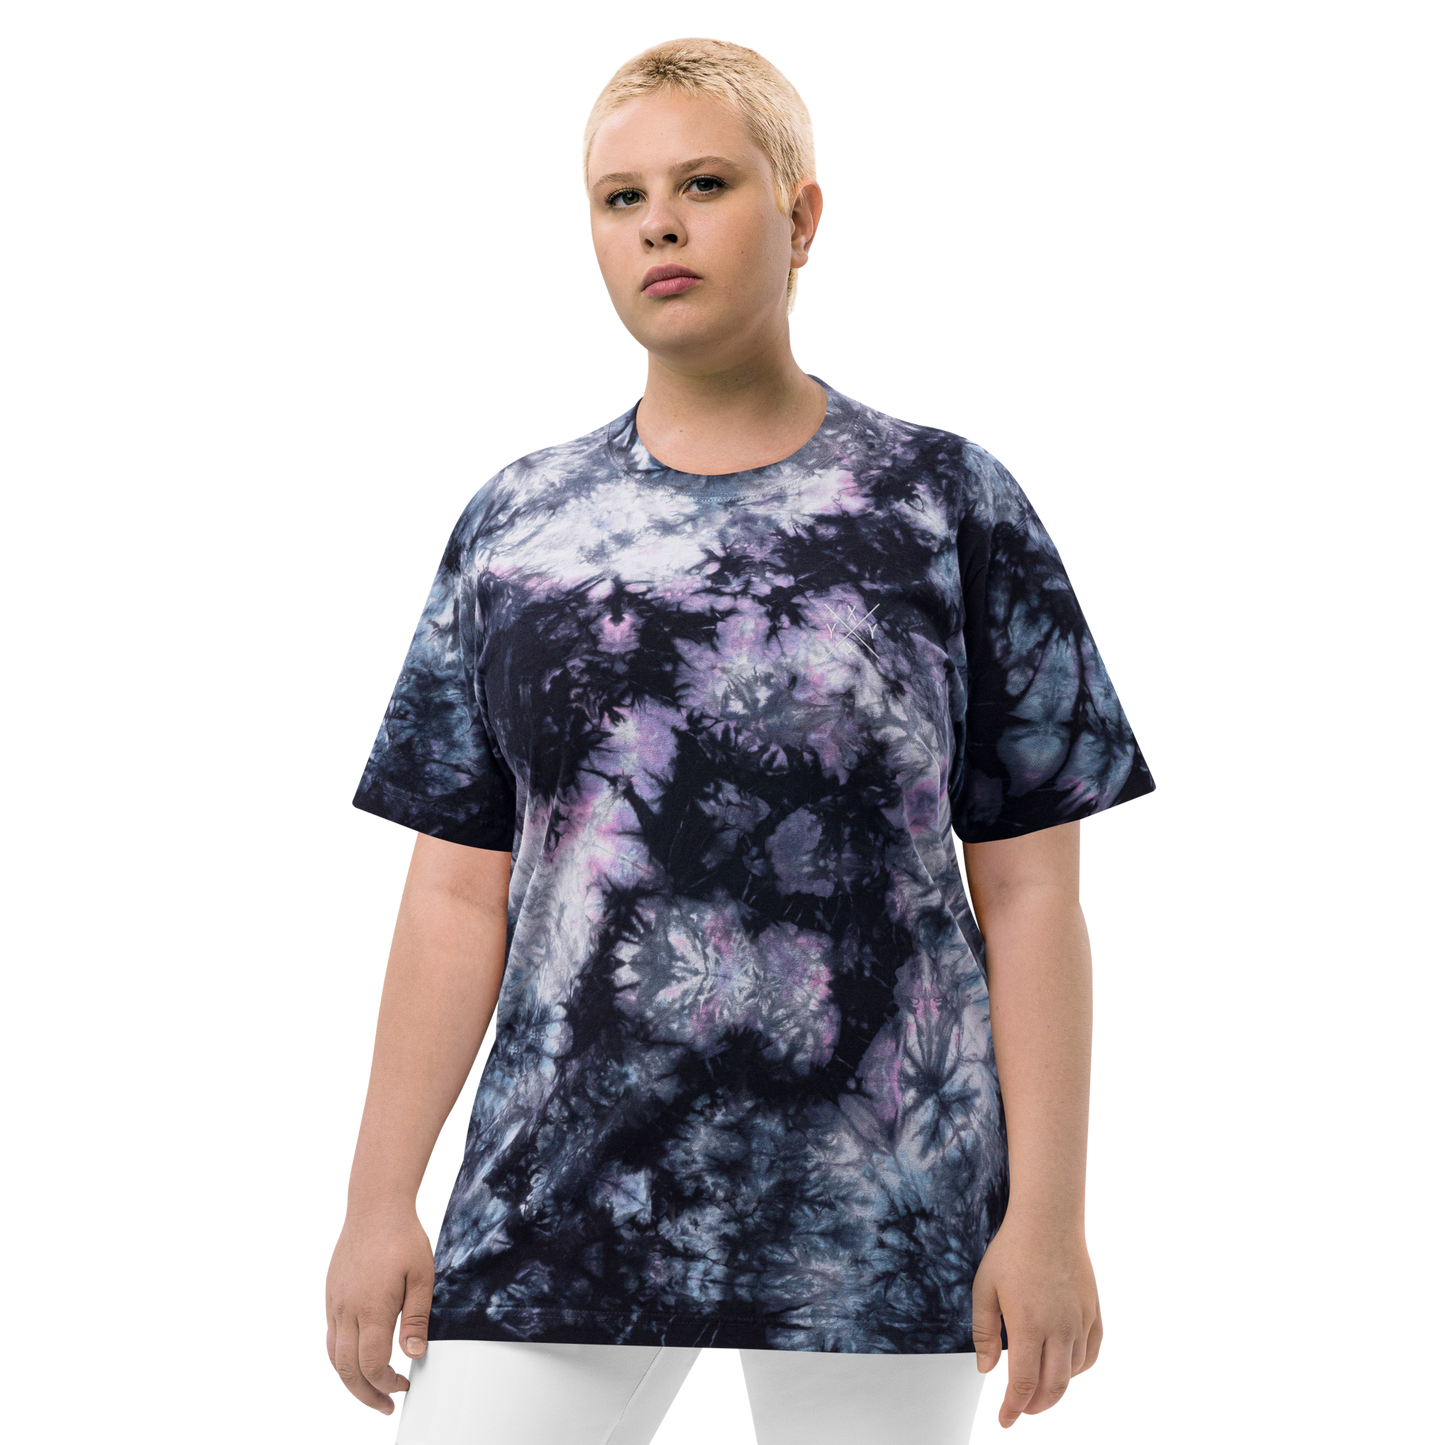 YHM Designs - YXY Whitehorse Oversized Tie-Dye T-Shirt - Crossed-X Design with Airport Code and Vintage Propliner - White Embroidery - Image 05